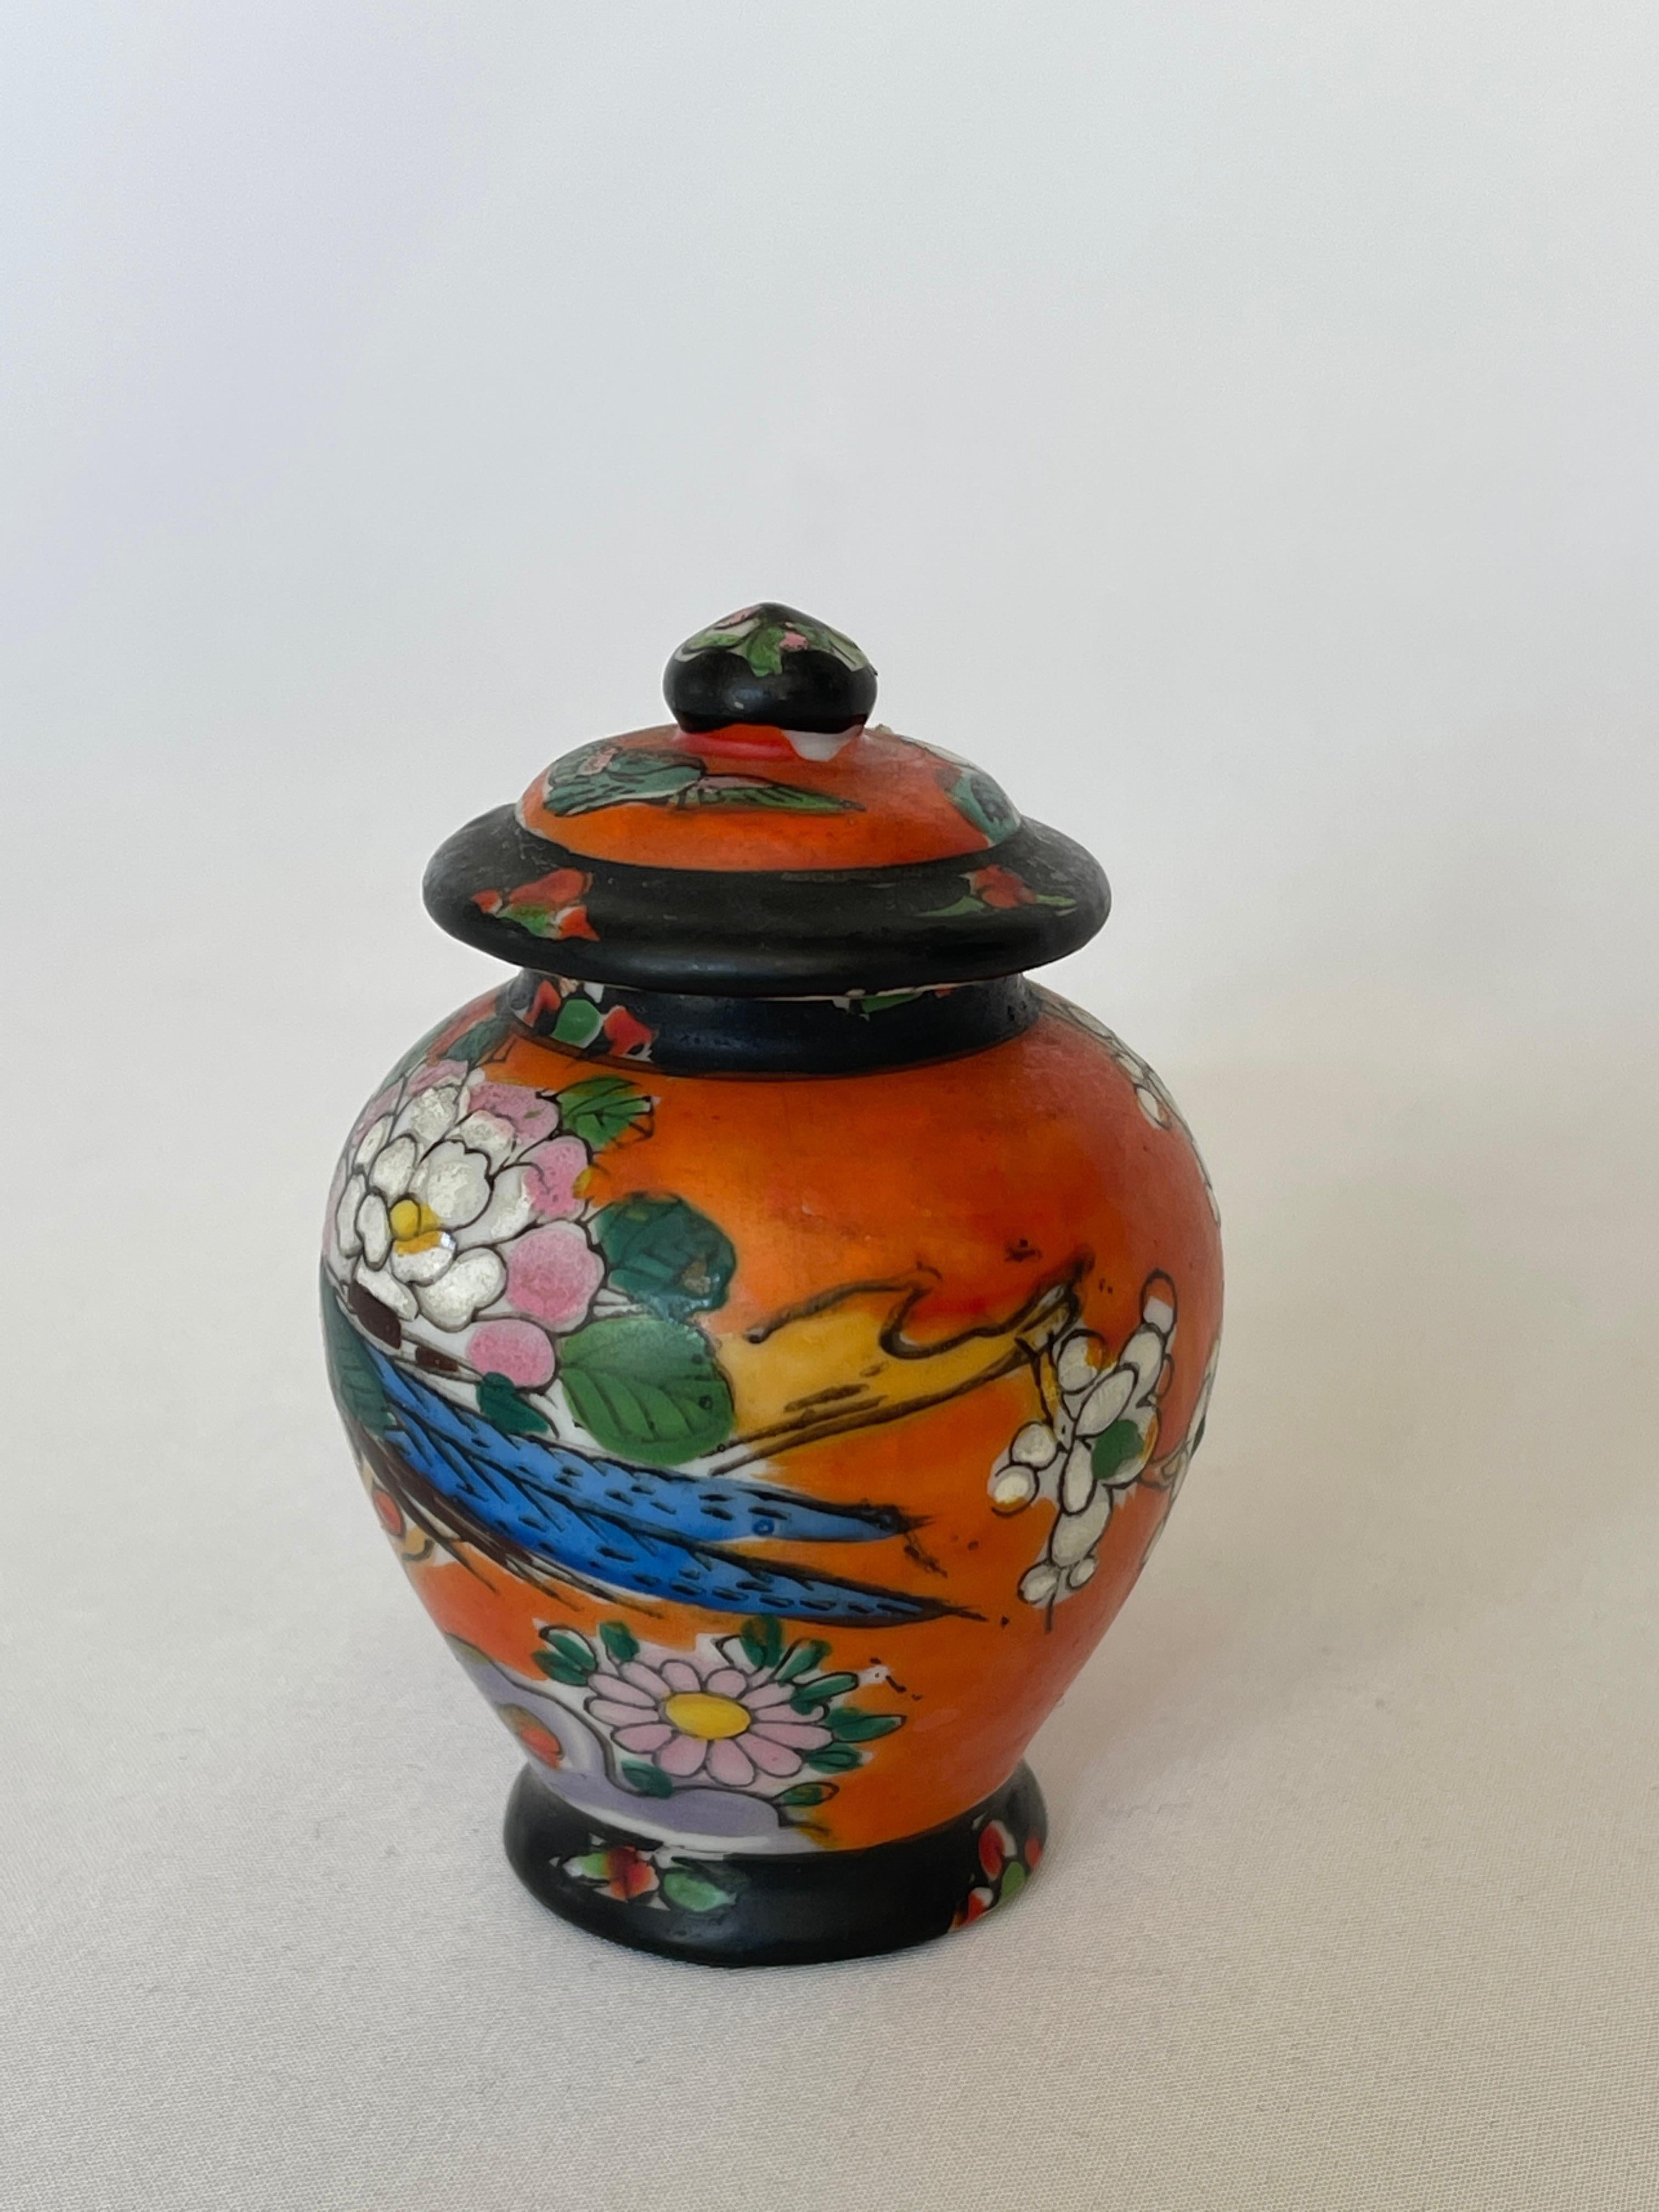 Hand painted Japanese porcelain miniature ginger jar with handled top.
Old Japan motifs of a peacock with chrysanthemum flower, dogwood trees, clouds and and butterfly. 

Stamped with signature on bottom, T & T Made in Japan Hand paint.